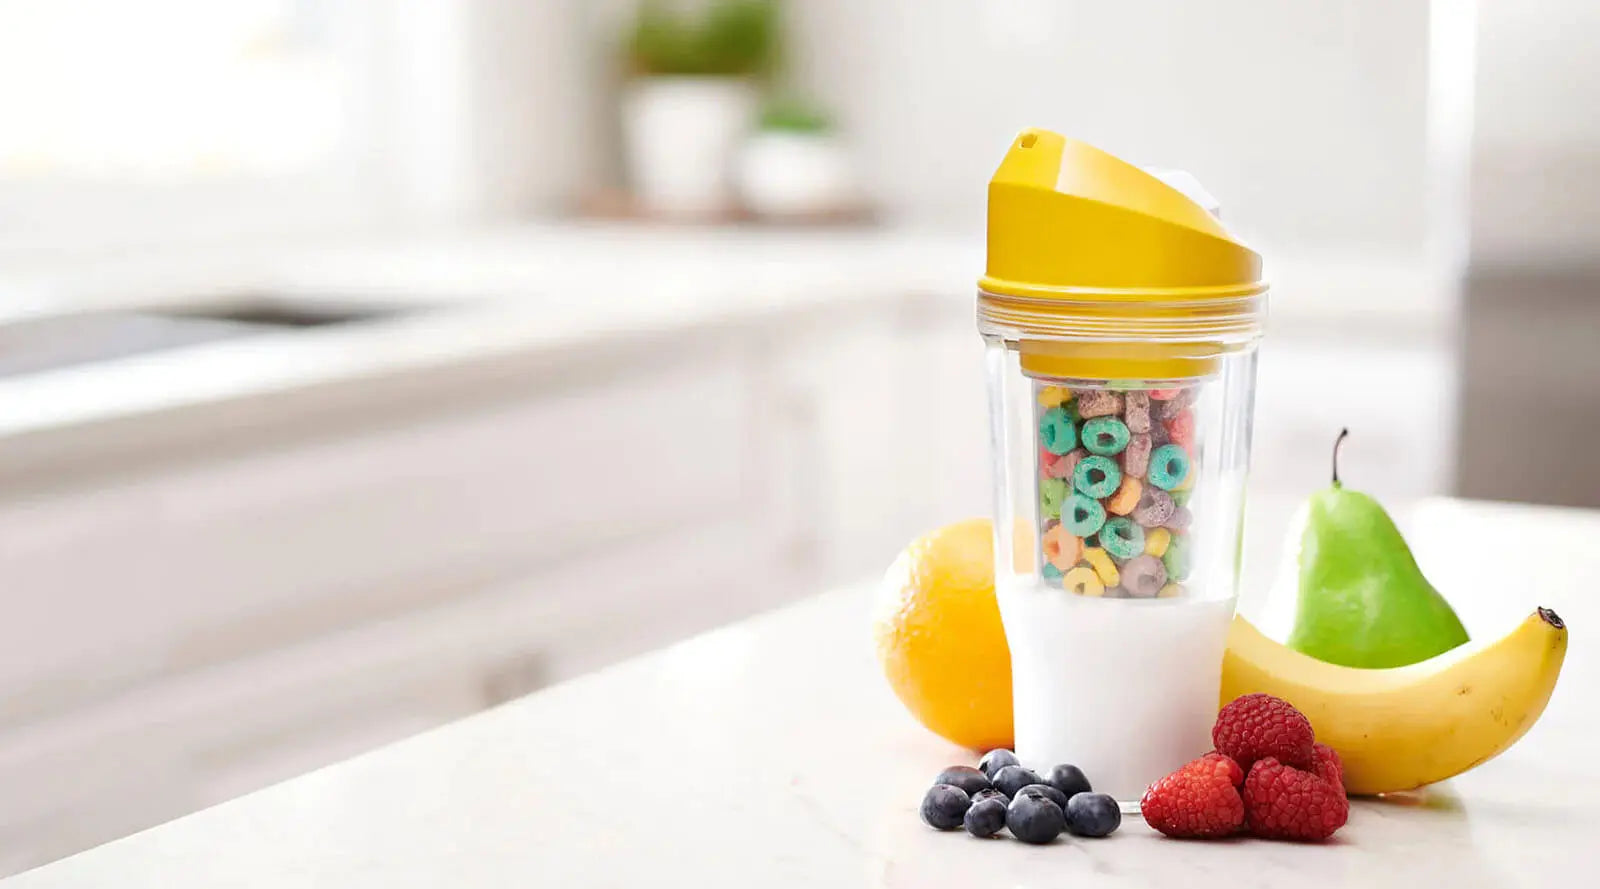 Shoppers Are 'Thrilled' with These Measuring Cups